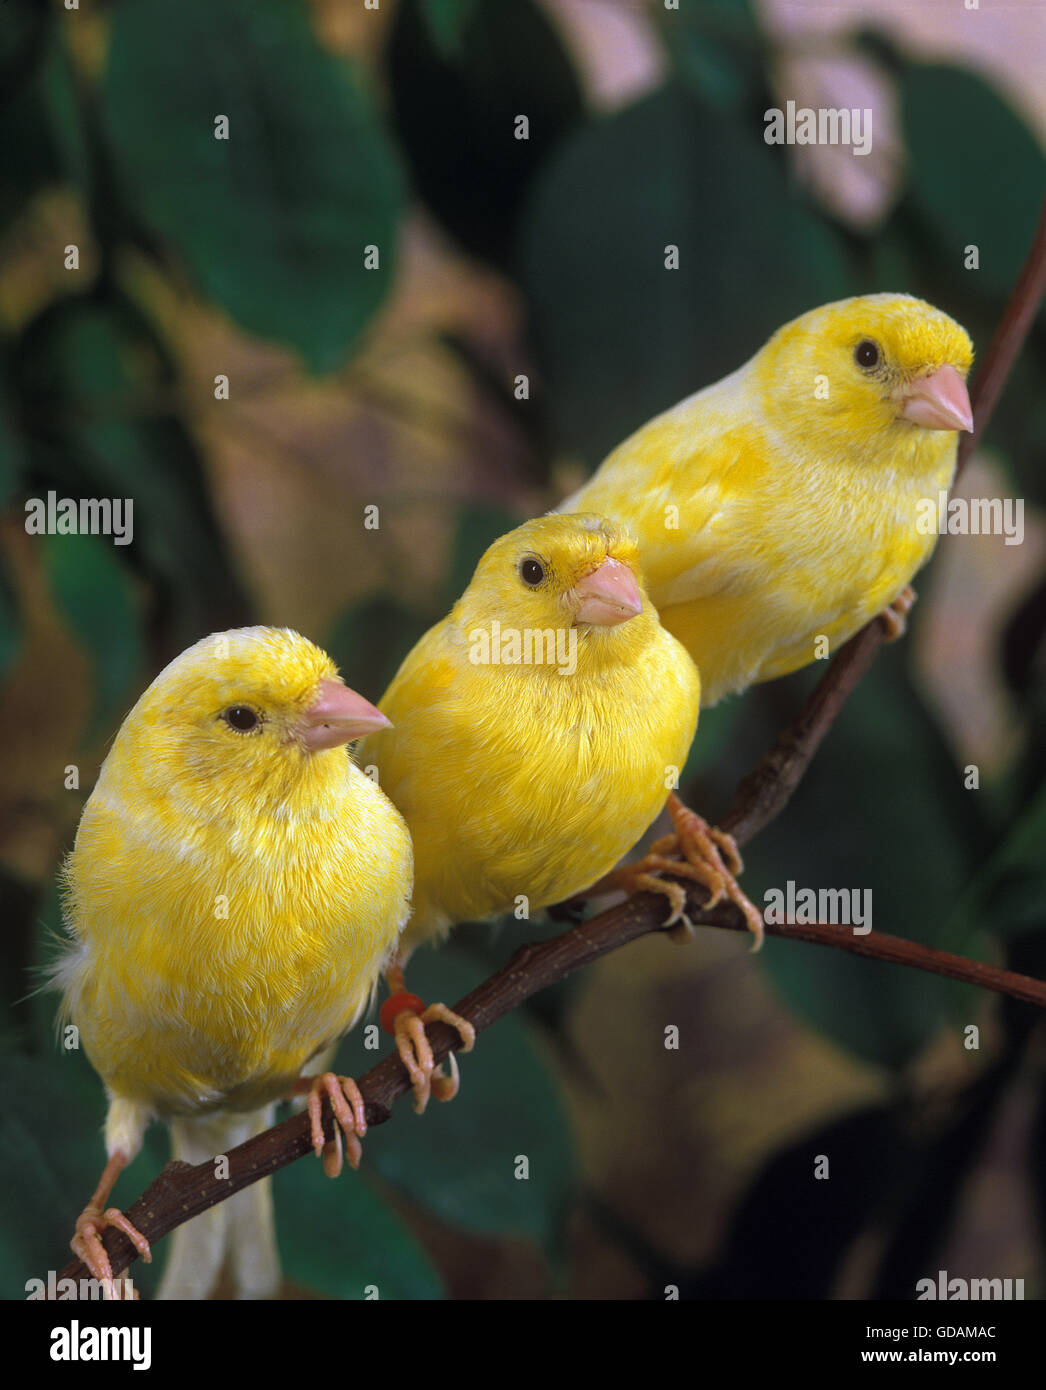 Yellow Canaries, serinus canaria, Adults on Branch Stock Photo